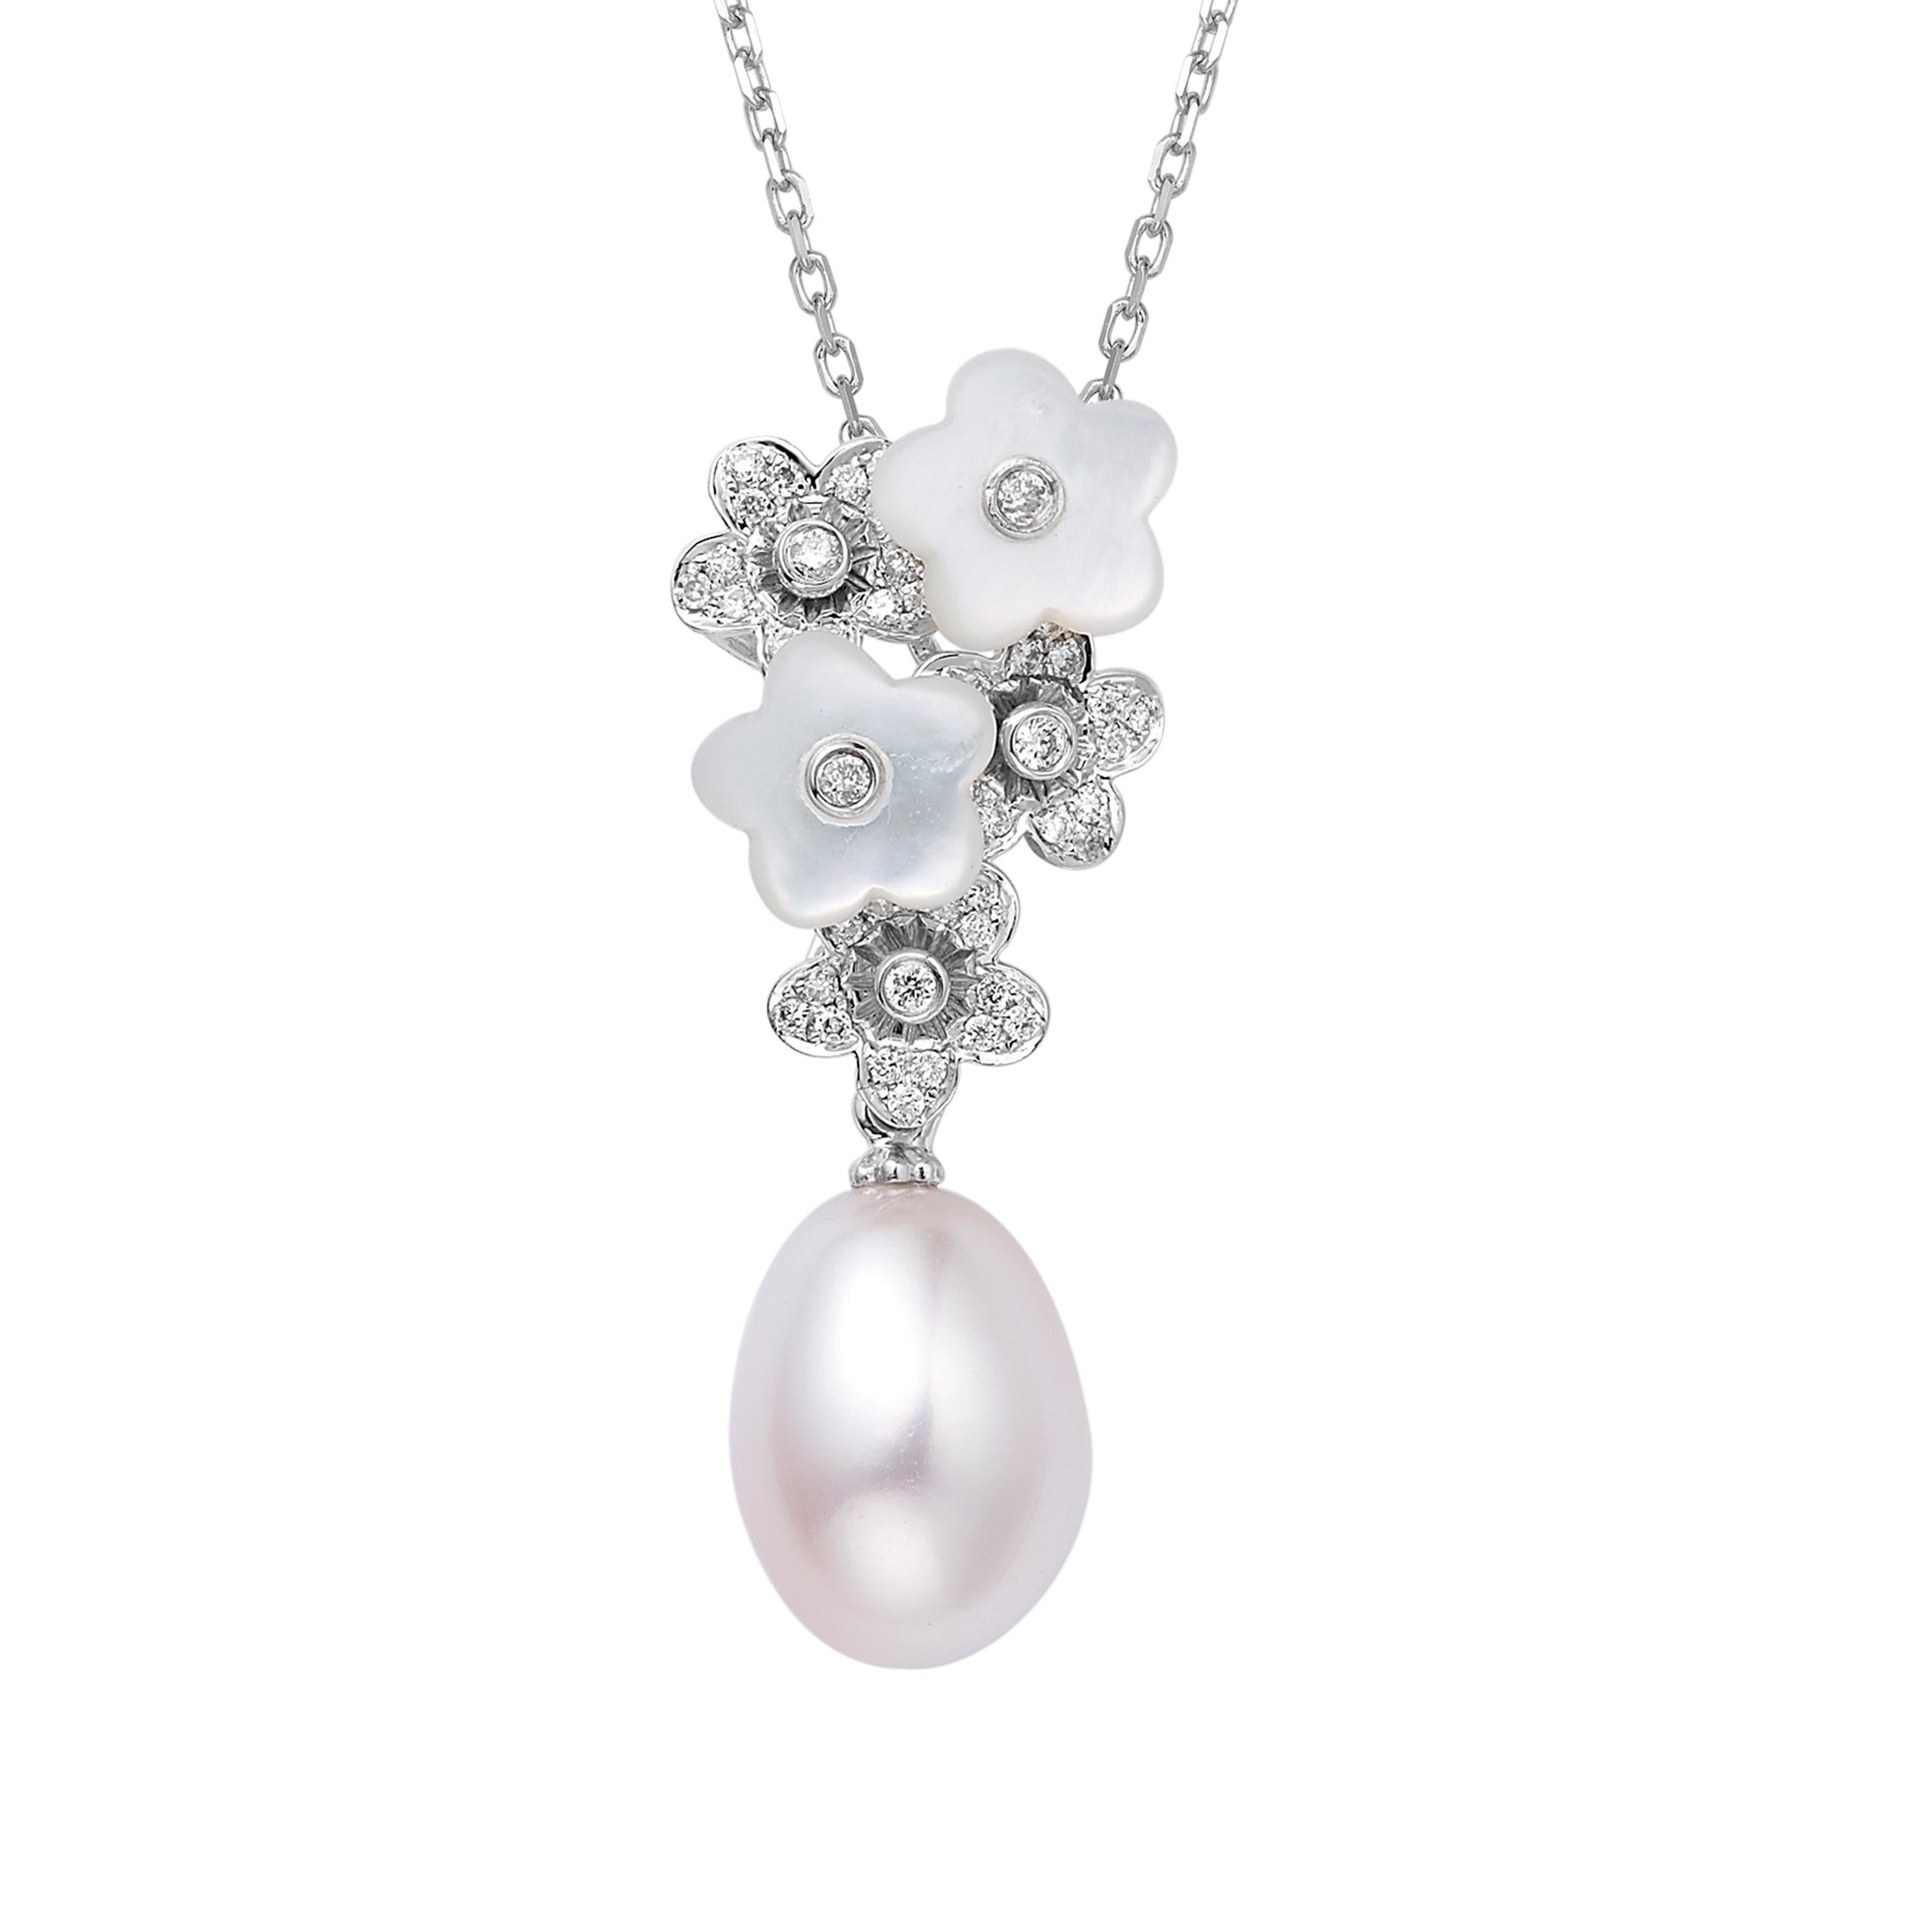 Description:
Alyssum pearl drop flower cluster pendant with 0.11ct diamond-set flowers, flower shaped white mother of pearls and a freshwater pearl drop. Set in 18ct white gold with a high polish. Chain length is 16 inches + 2 inch